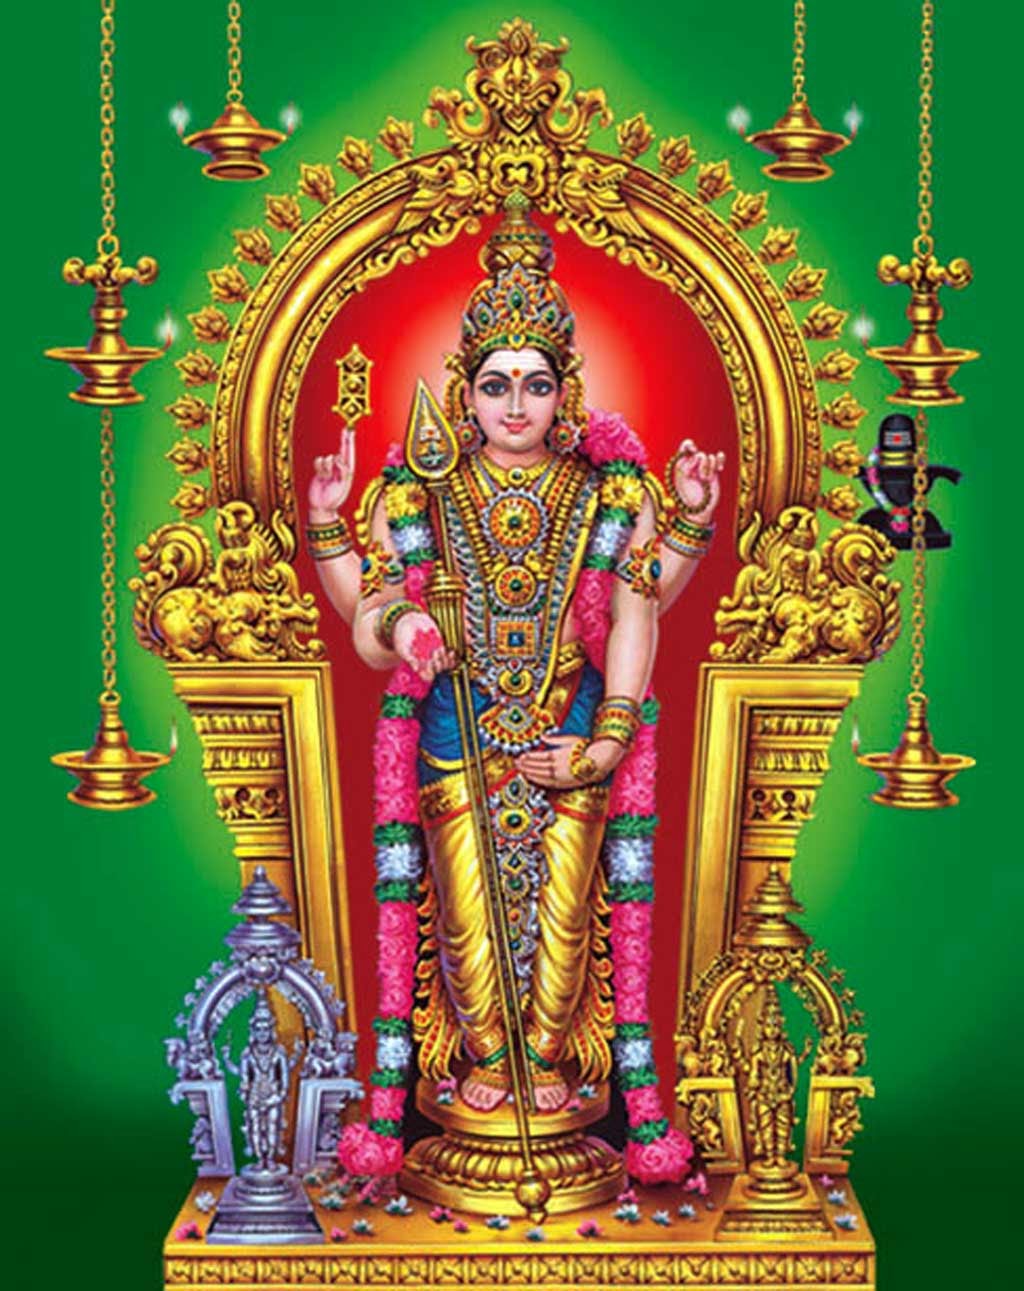 lord muruga wallpapers religious hq lord muruga pictures 4k wallpapers 2019 lord muruga pictures 4k wallpapers